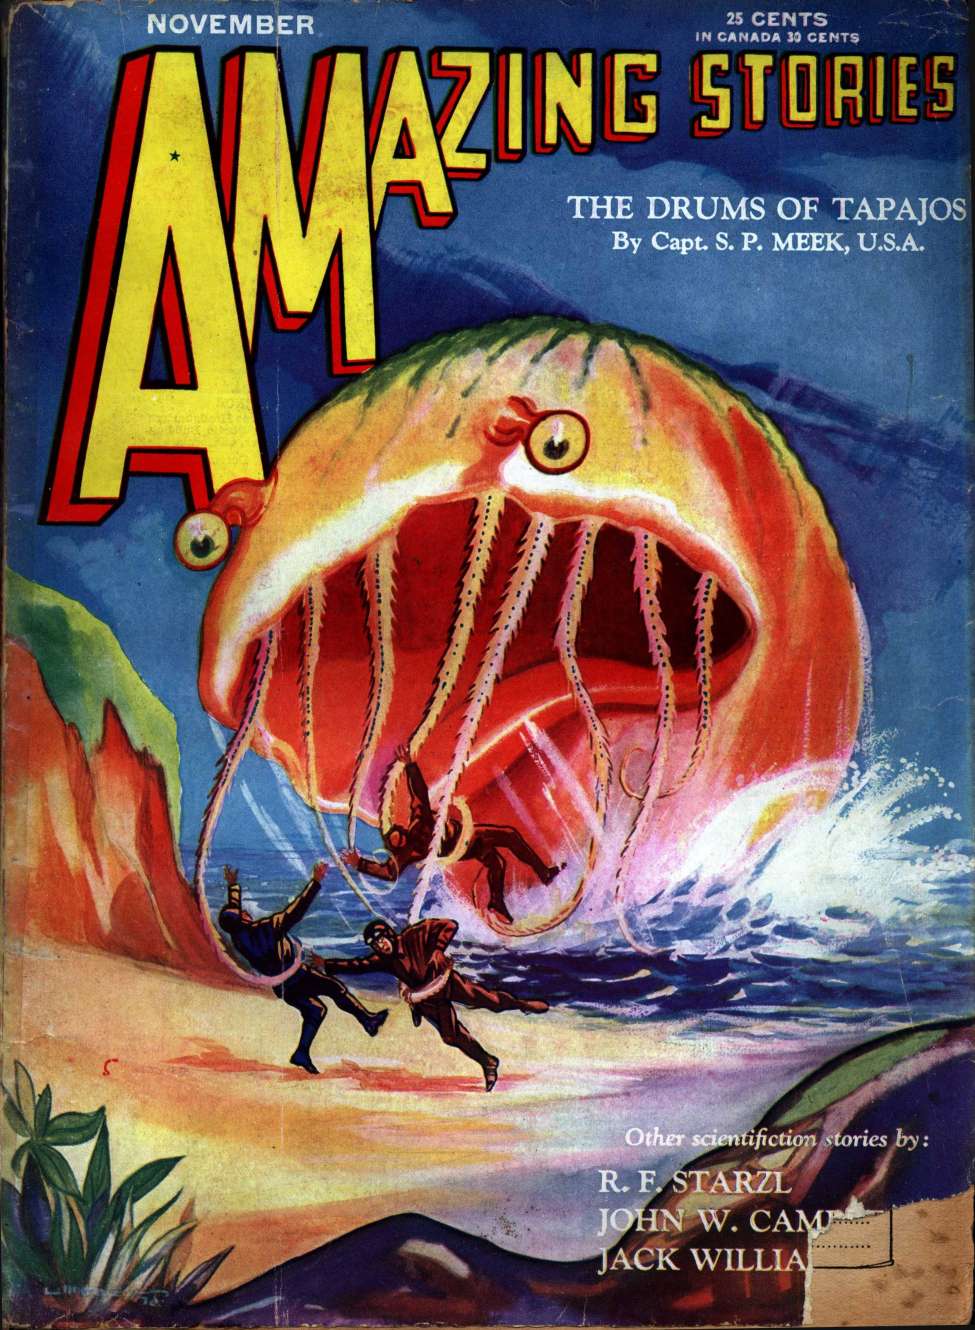 Comic Book Cover For Amazing Stories v5 8 - The Drums of Tapajos - Capt. S. P. Meek